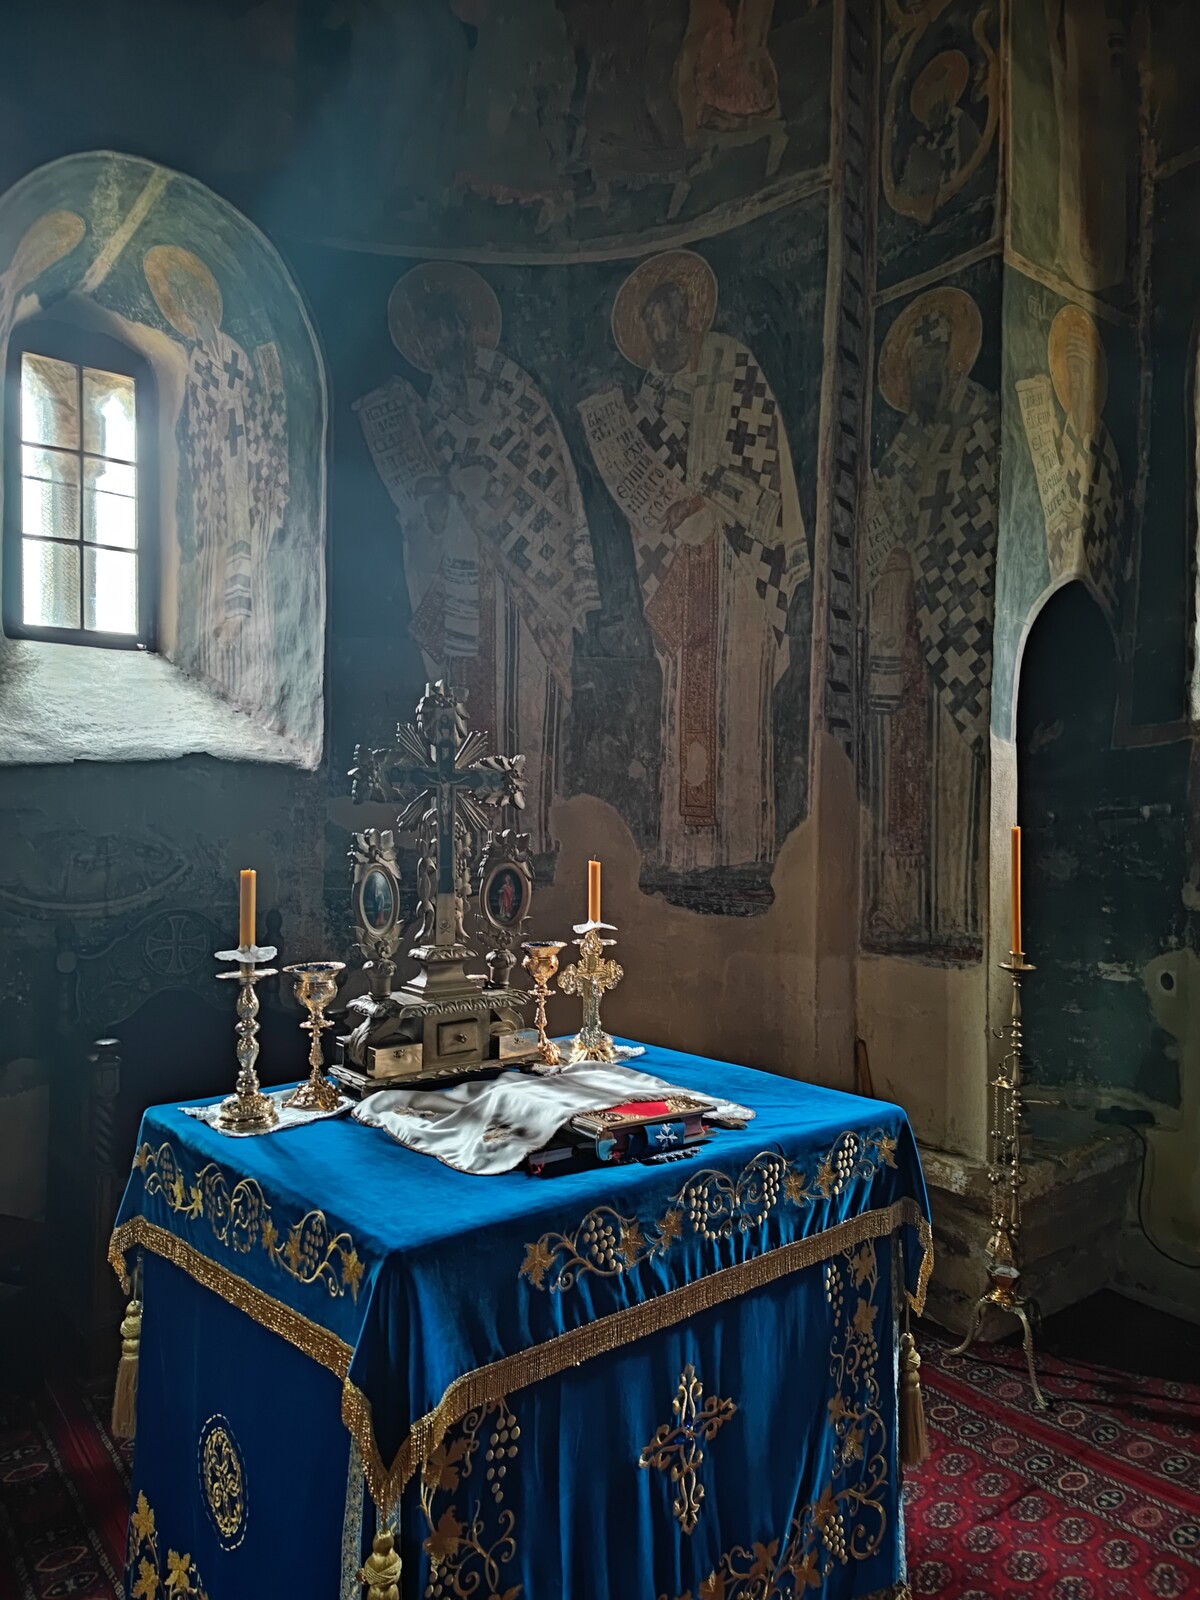 View of the Sanctuary and the Altar Table